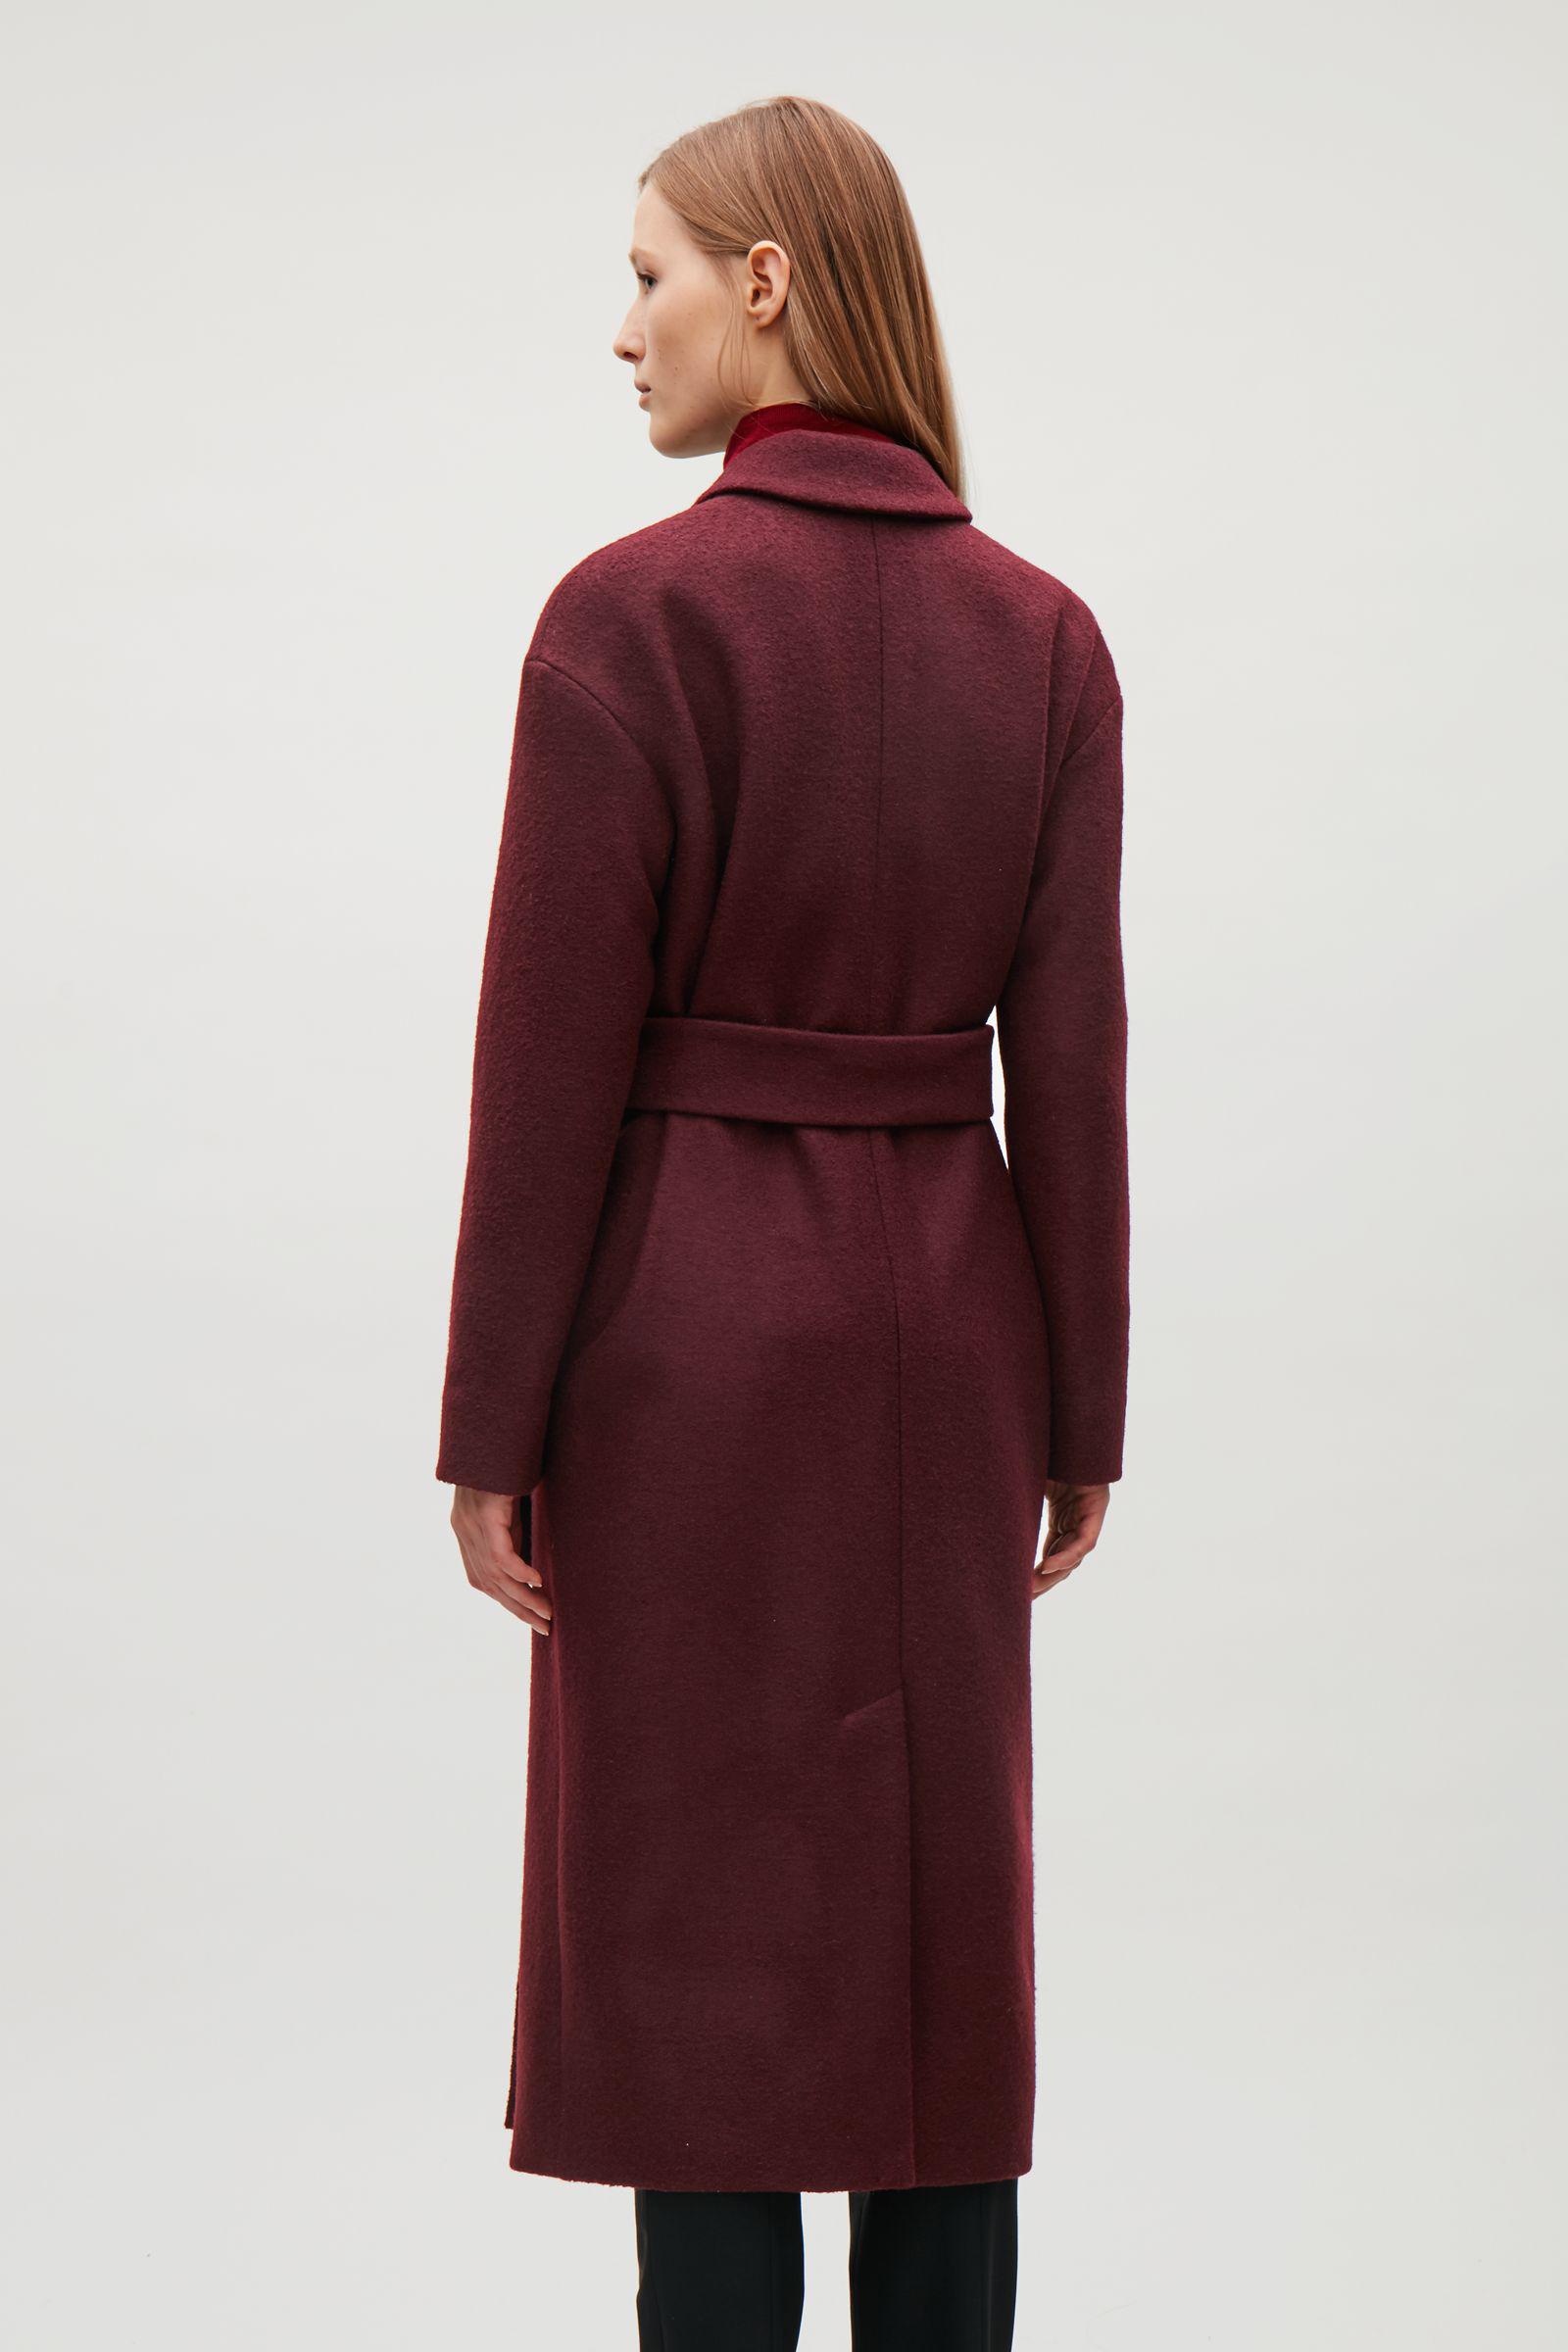 Lyst - Cos Belted Wool Coat in Red